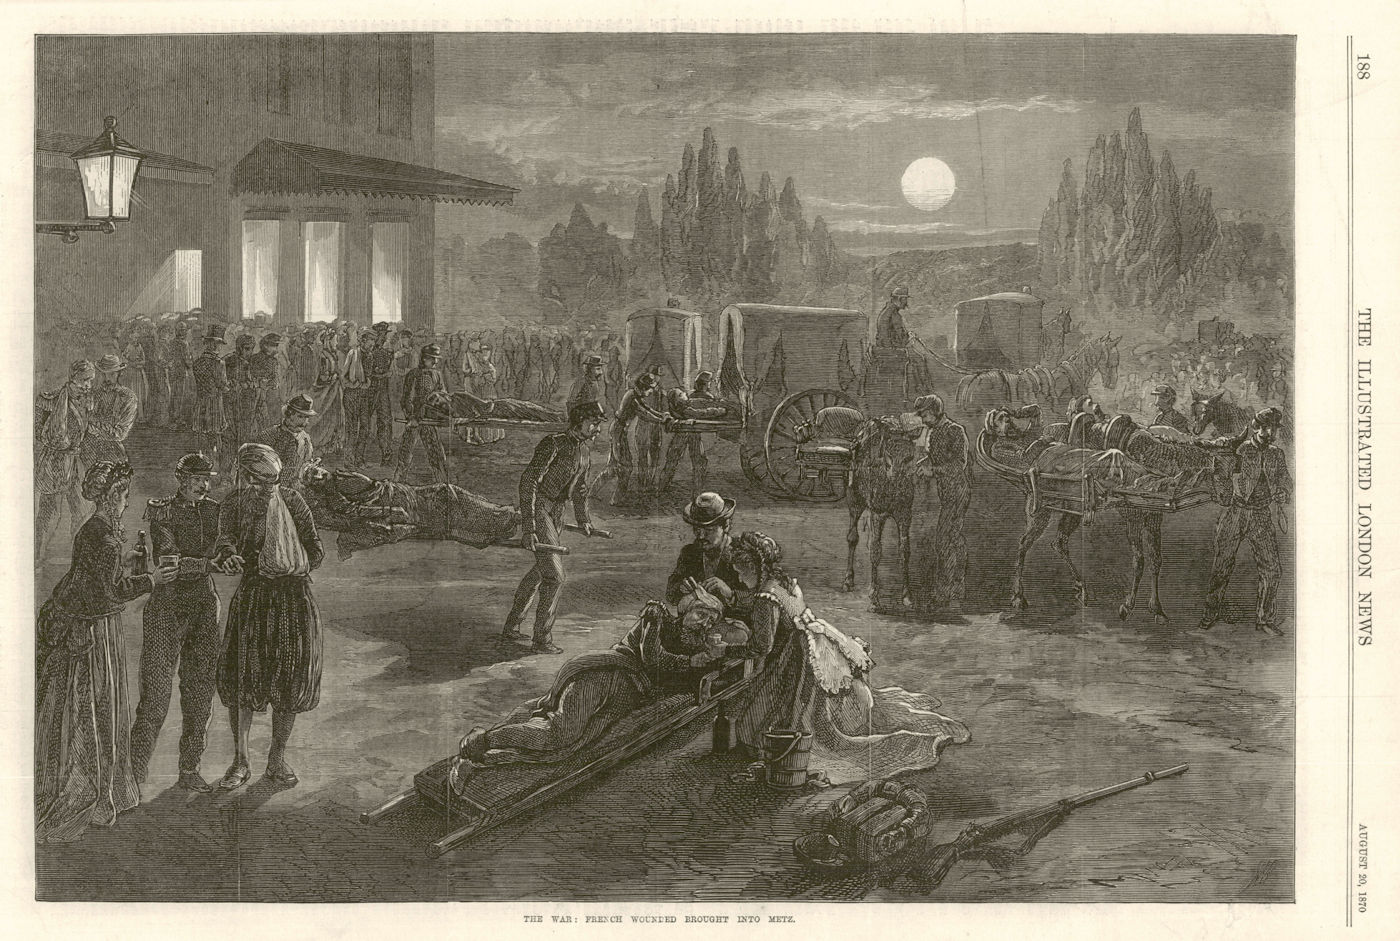 Associate Product Franco-Prussian War: French wounded brought into Metz. Moselle 1870 old print